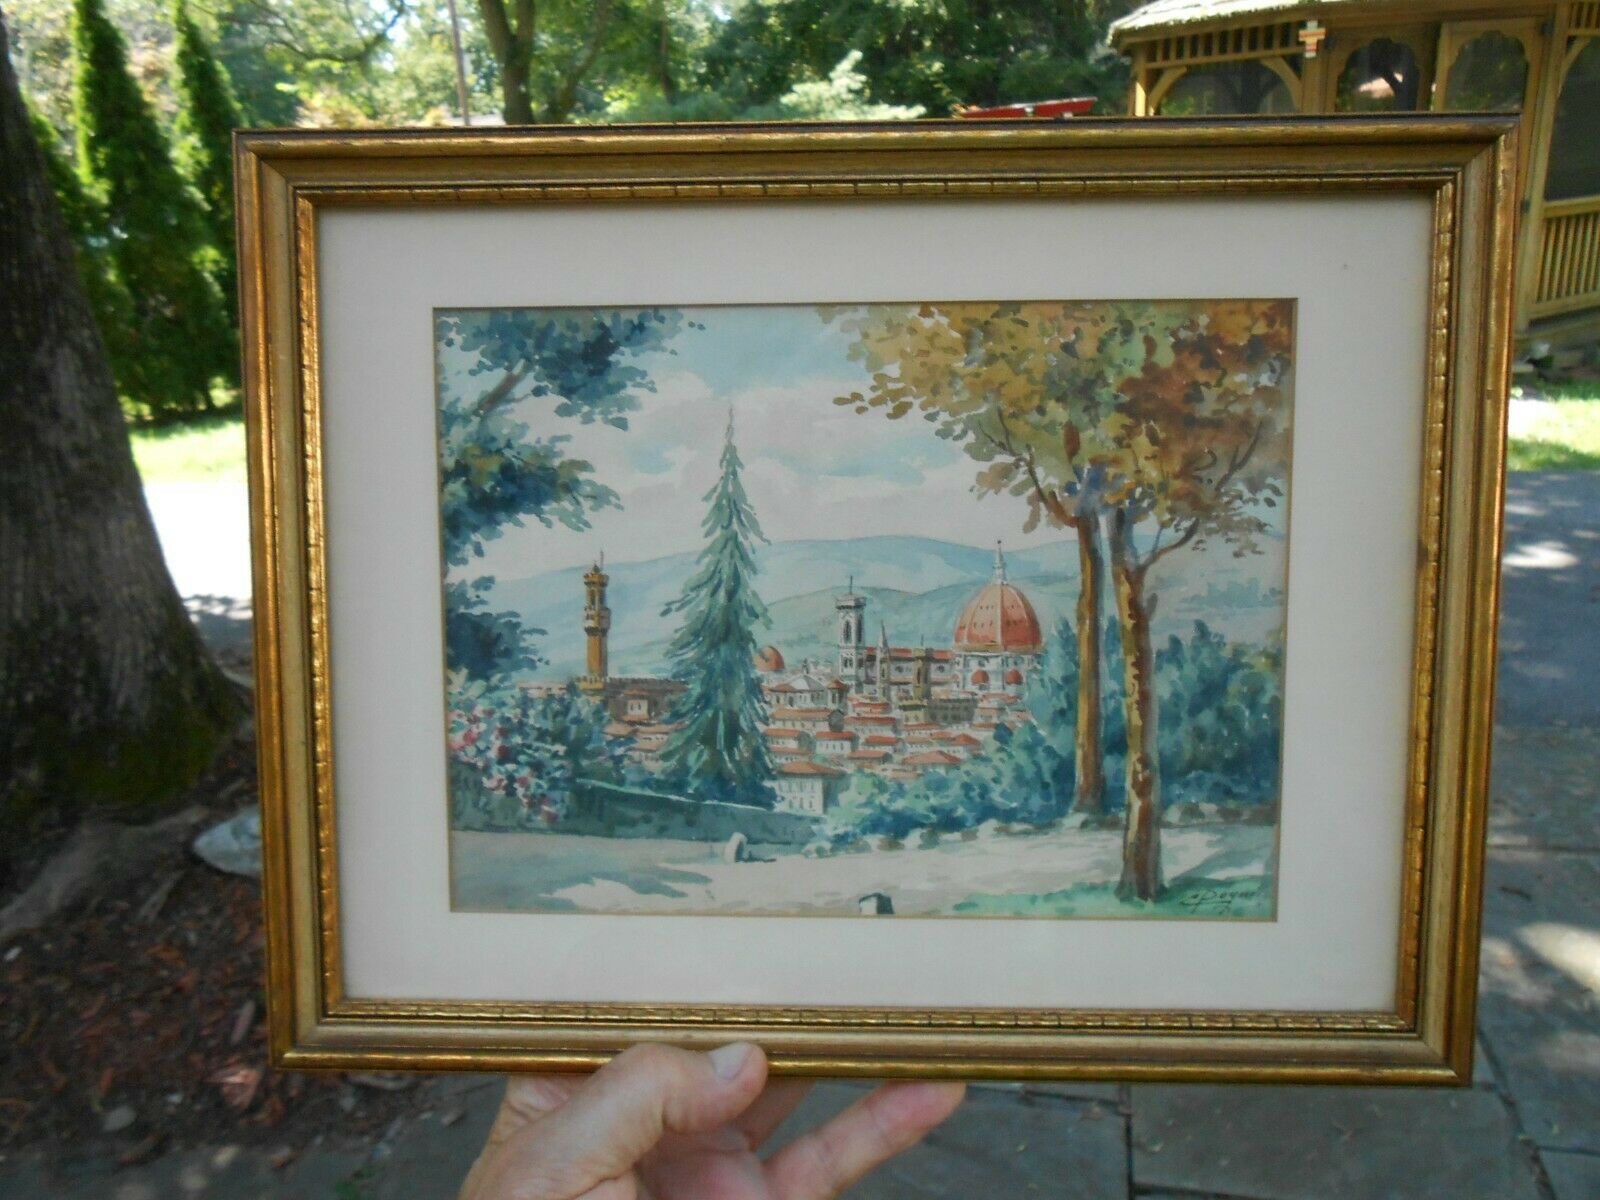 C. POGNI SIGNED WATERCOLOR FRAMED AND MATTED UNDER GLASS, VINTAGE, SEE PICTURES